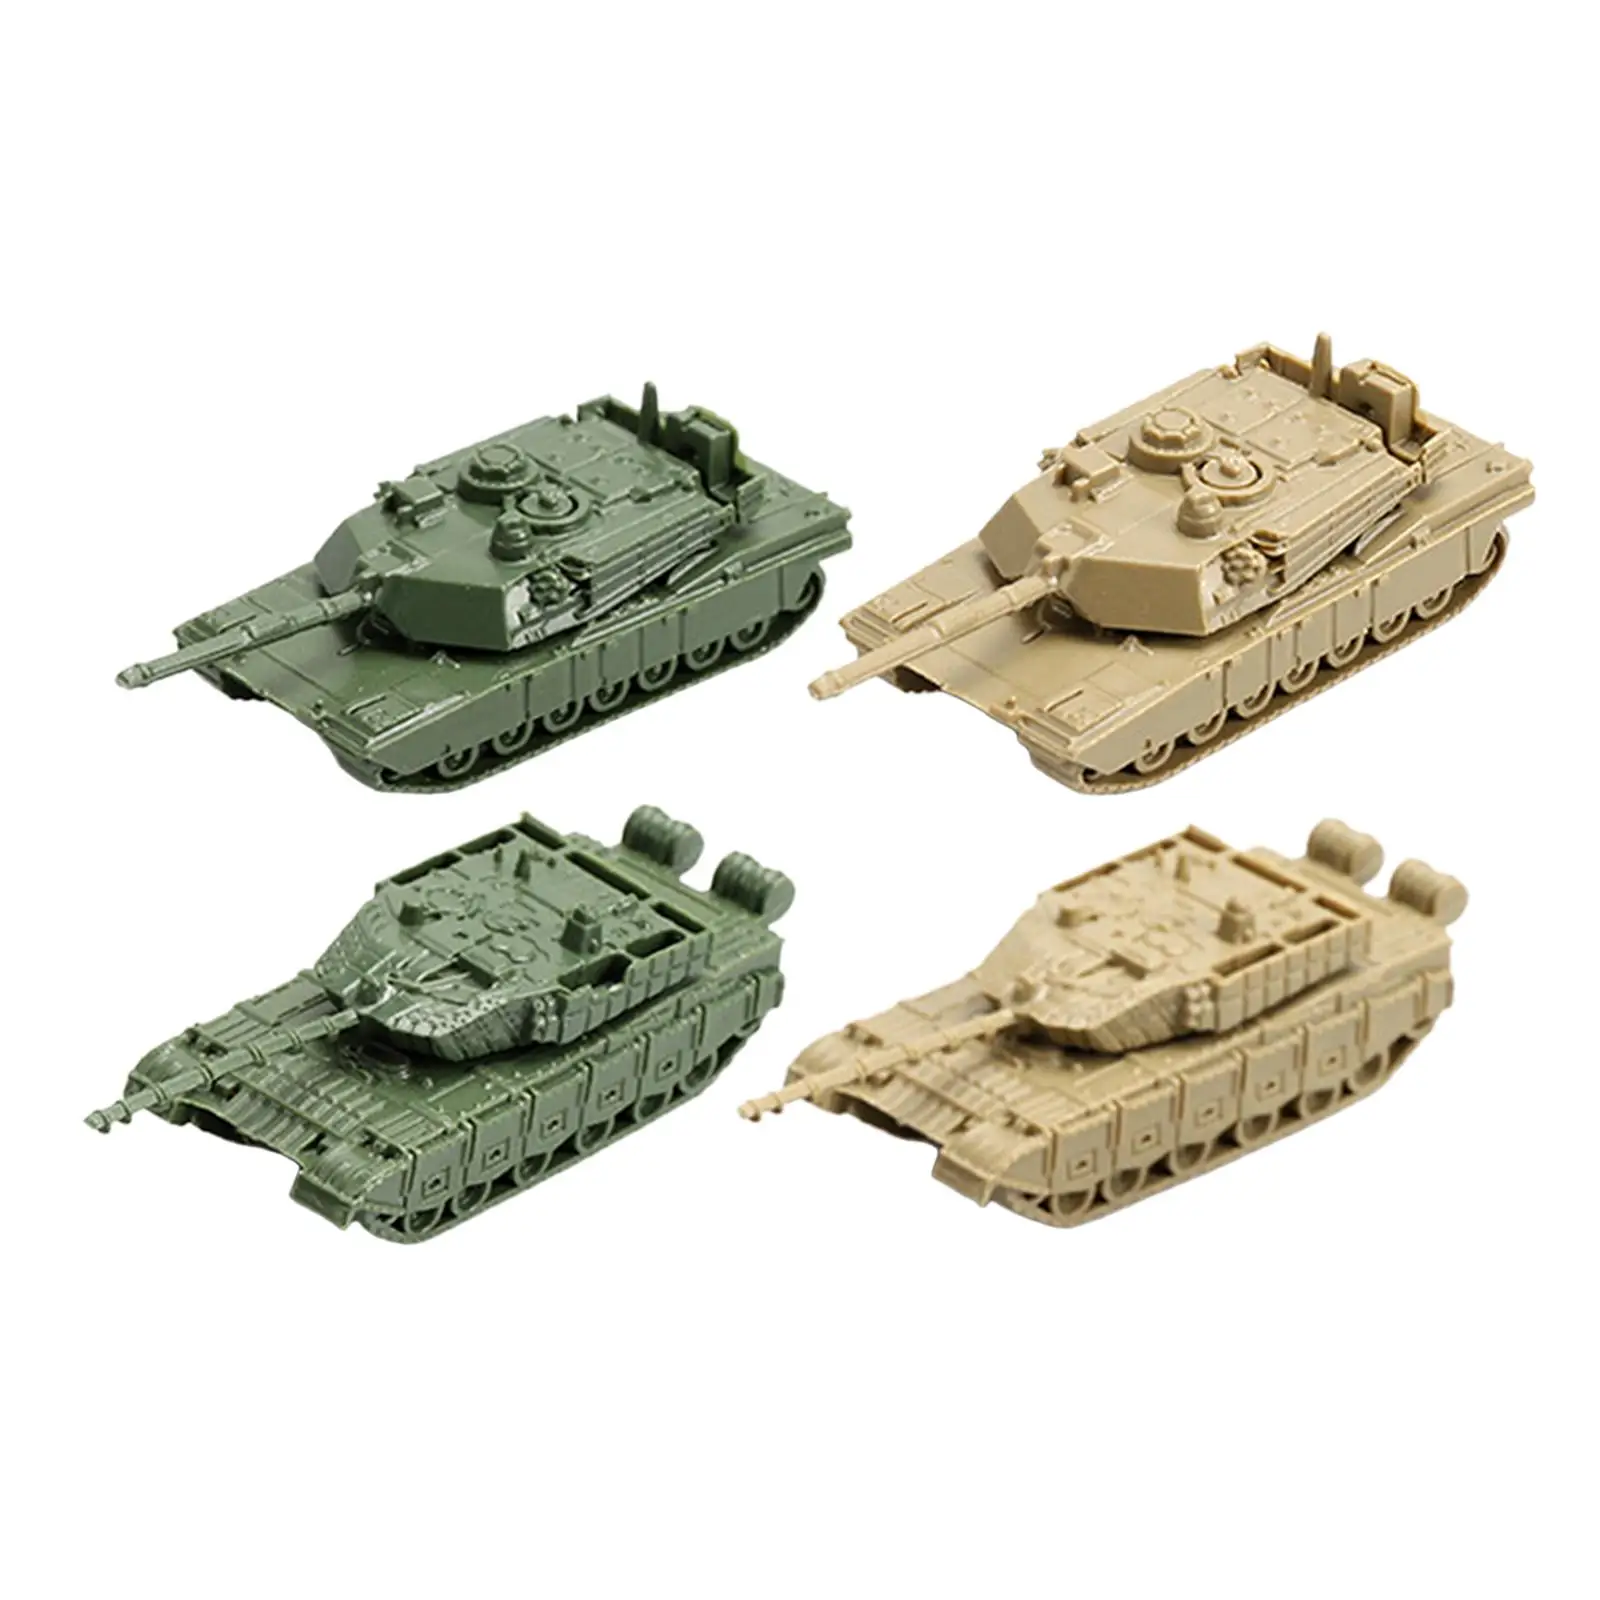 1:144 Tank Model Decorative Party Favors Toys Collection Gifts Display Durable 3D Puzzle for Boy and Girl Adult Kids